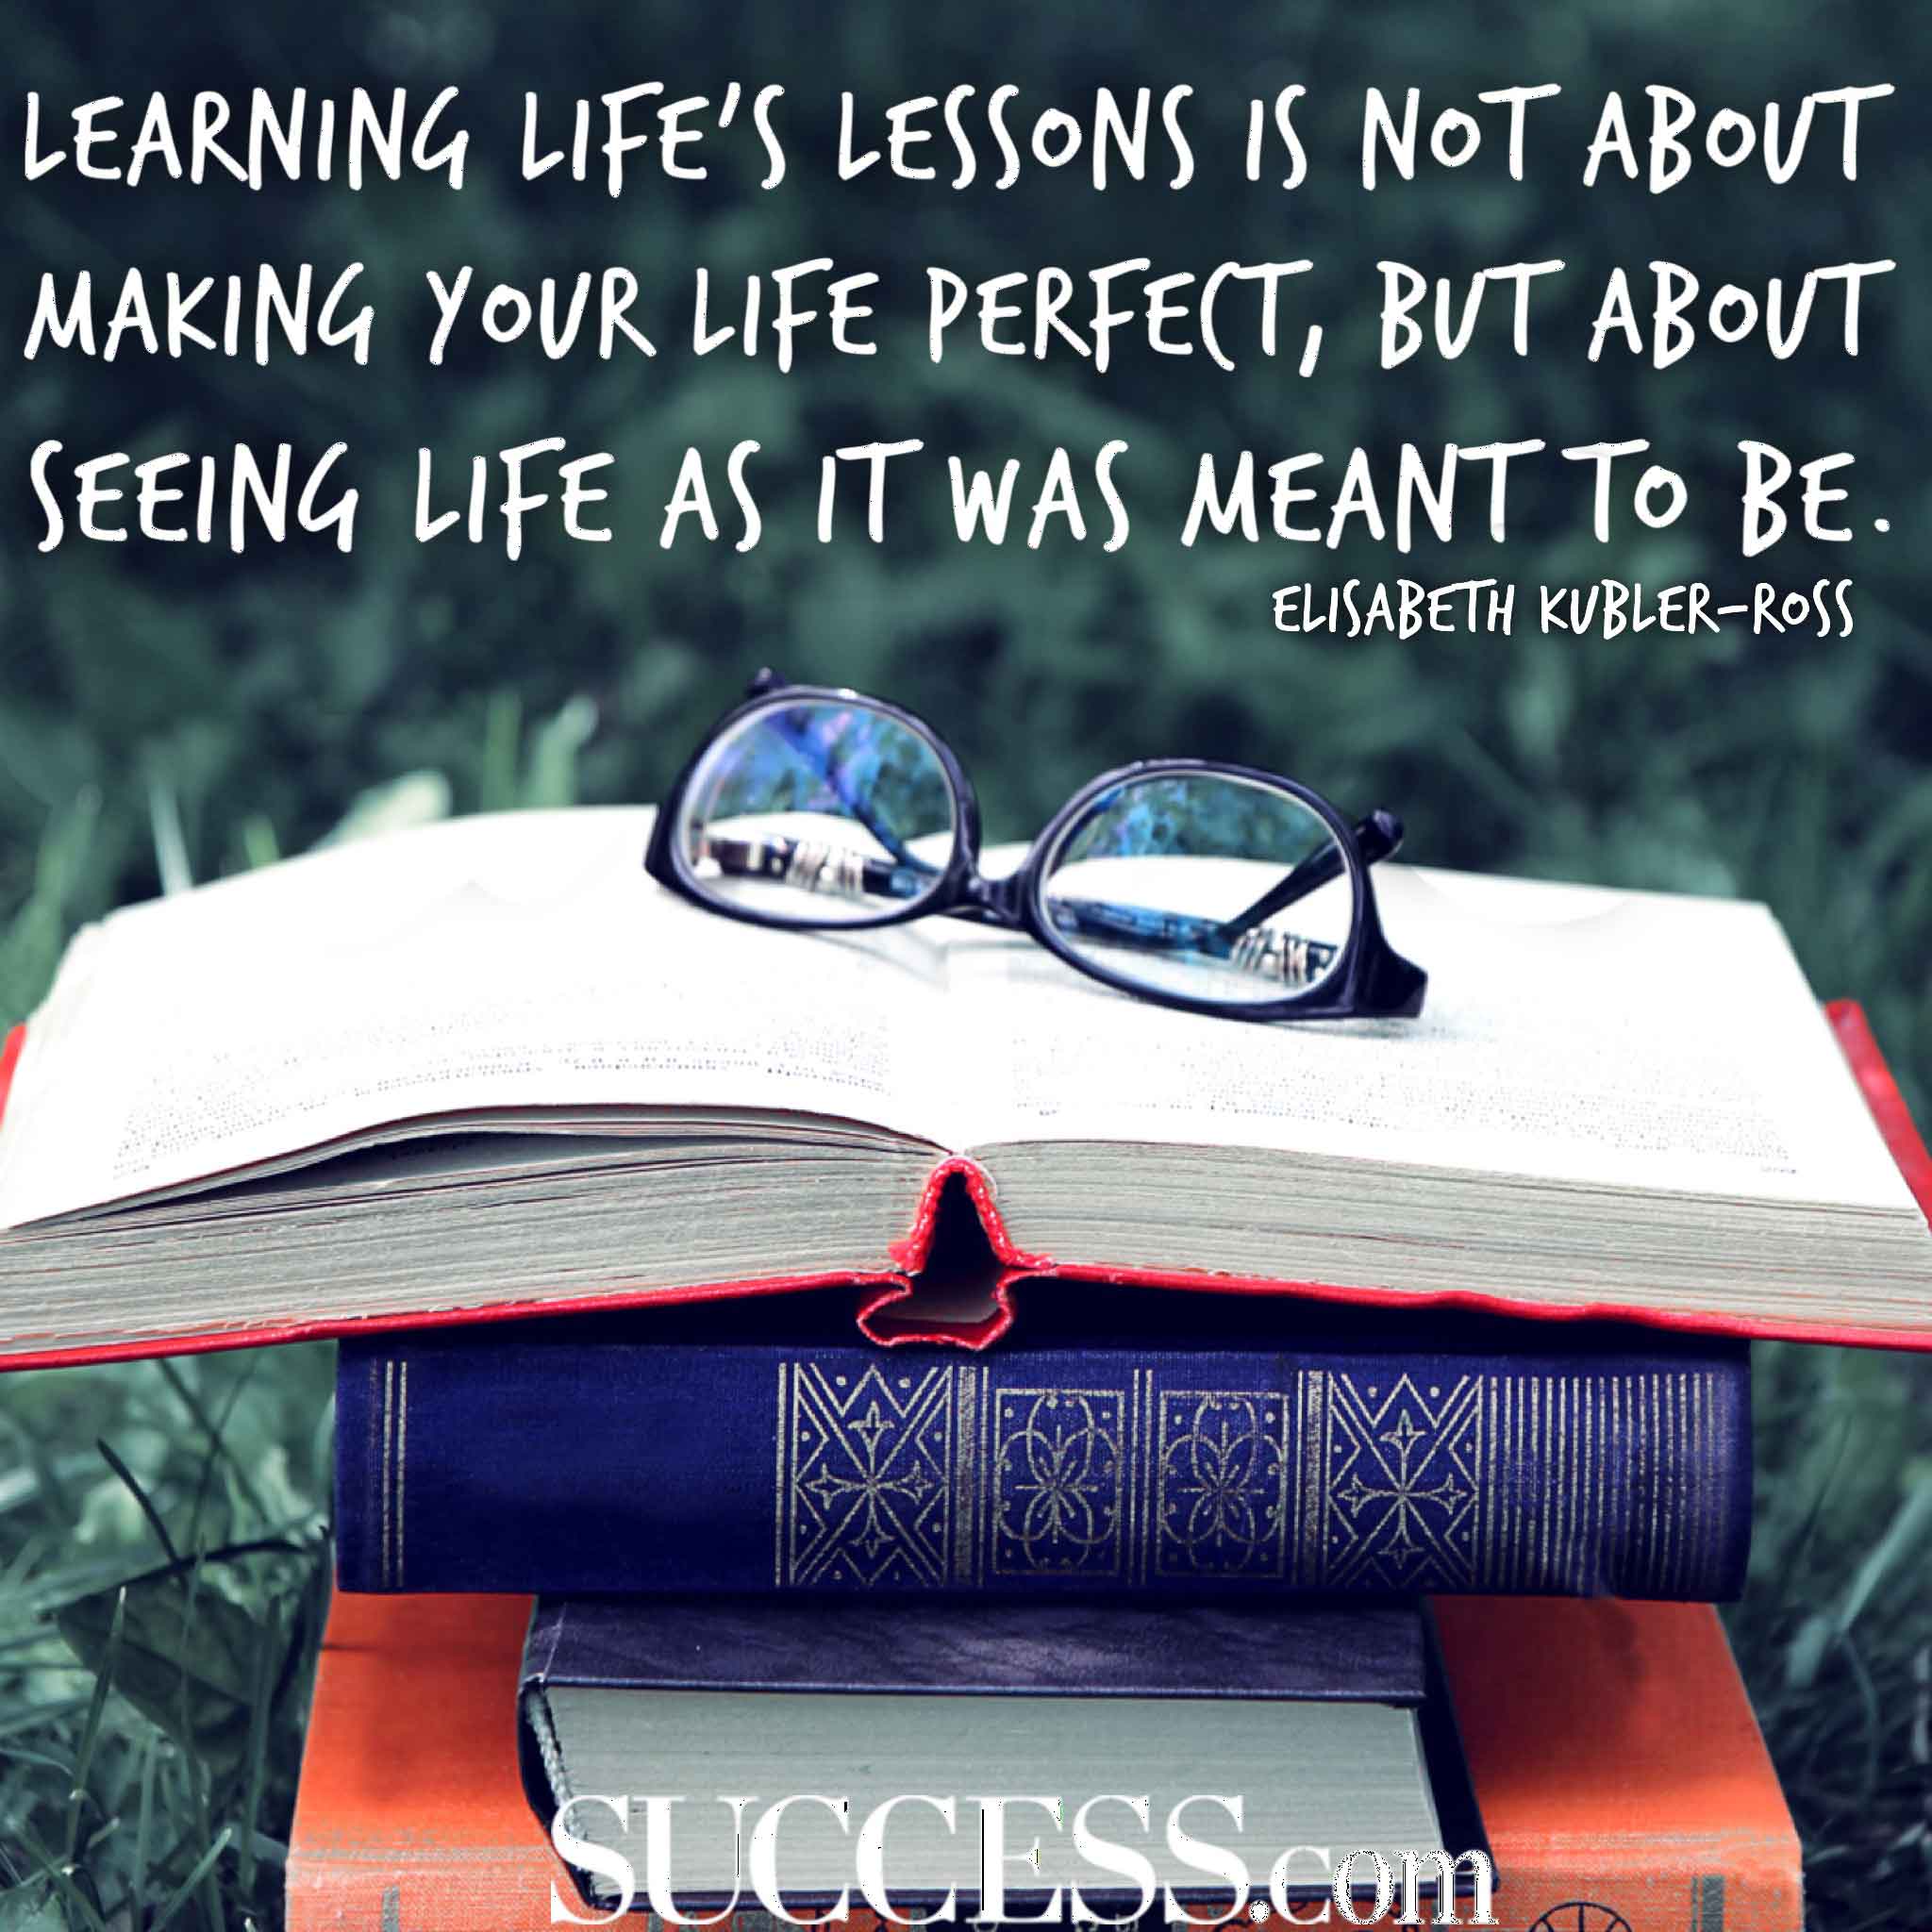 15 Quotes to Inspire You to Never Stop Learning